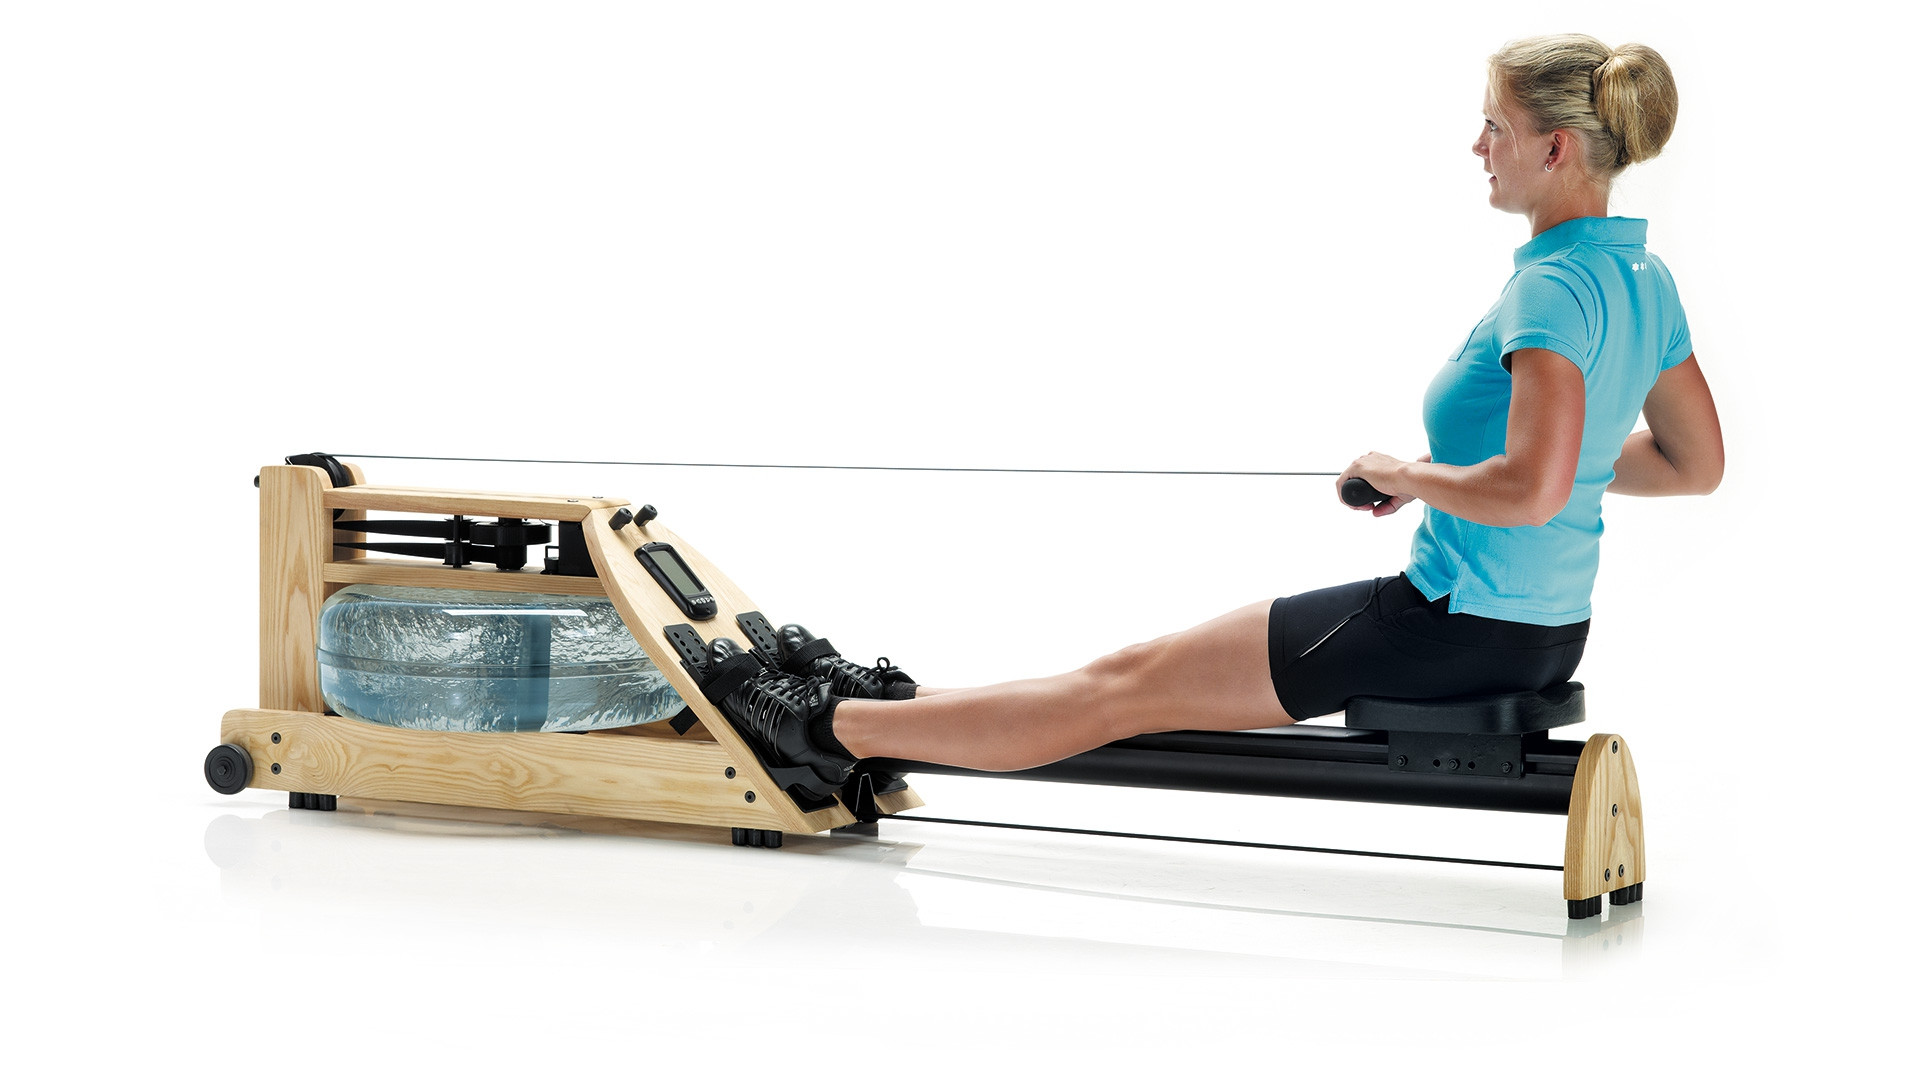 WATERROWER A1 STUDIO ROWING MACHINE WITH A1 MONITOR